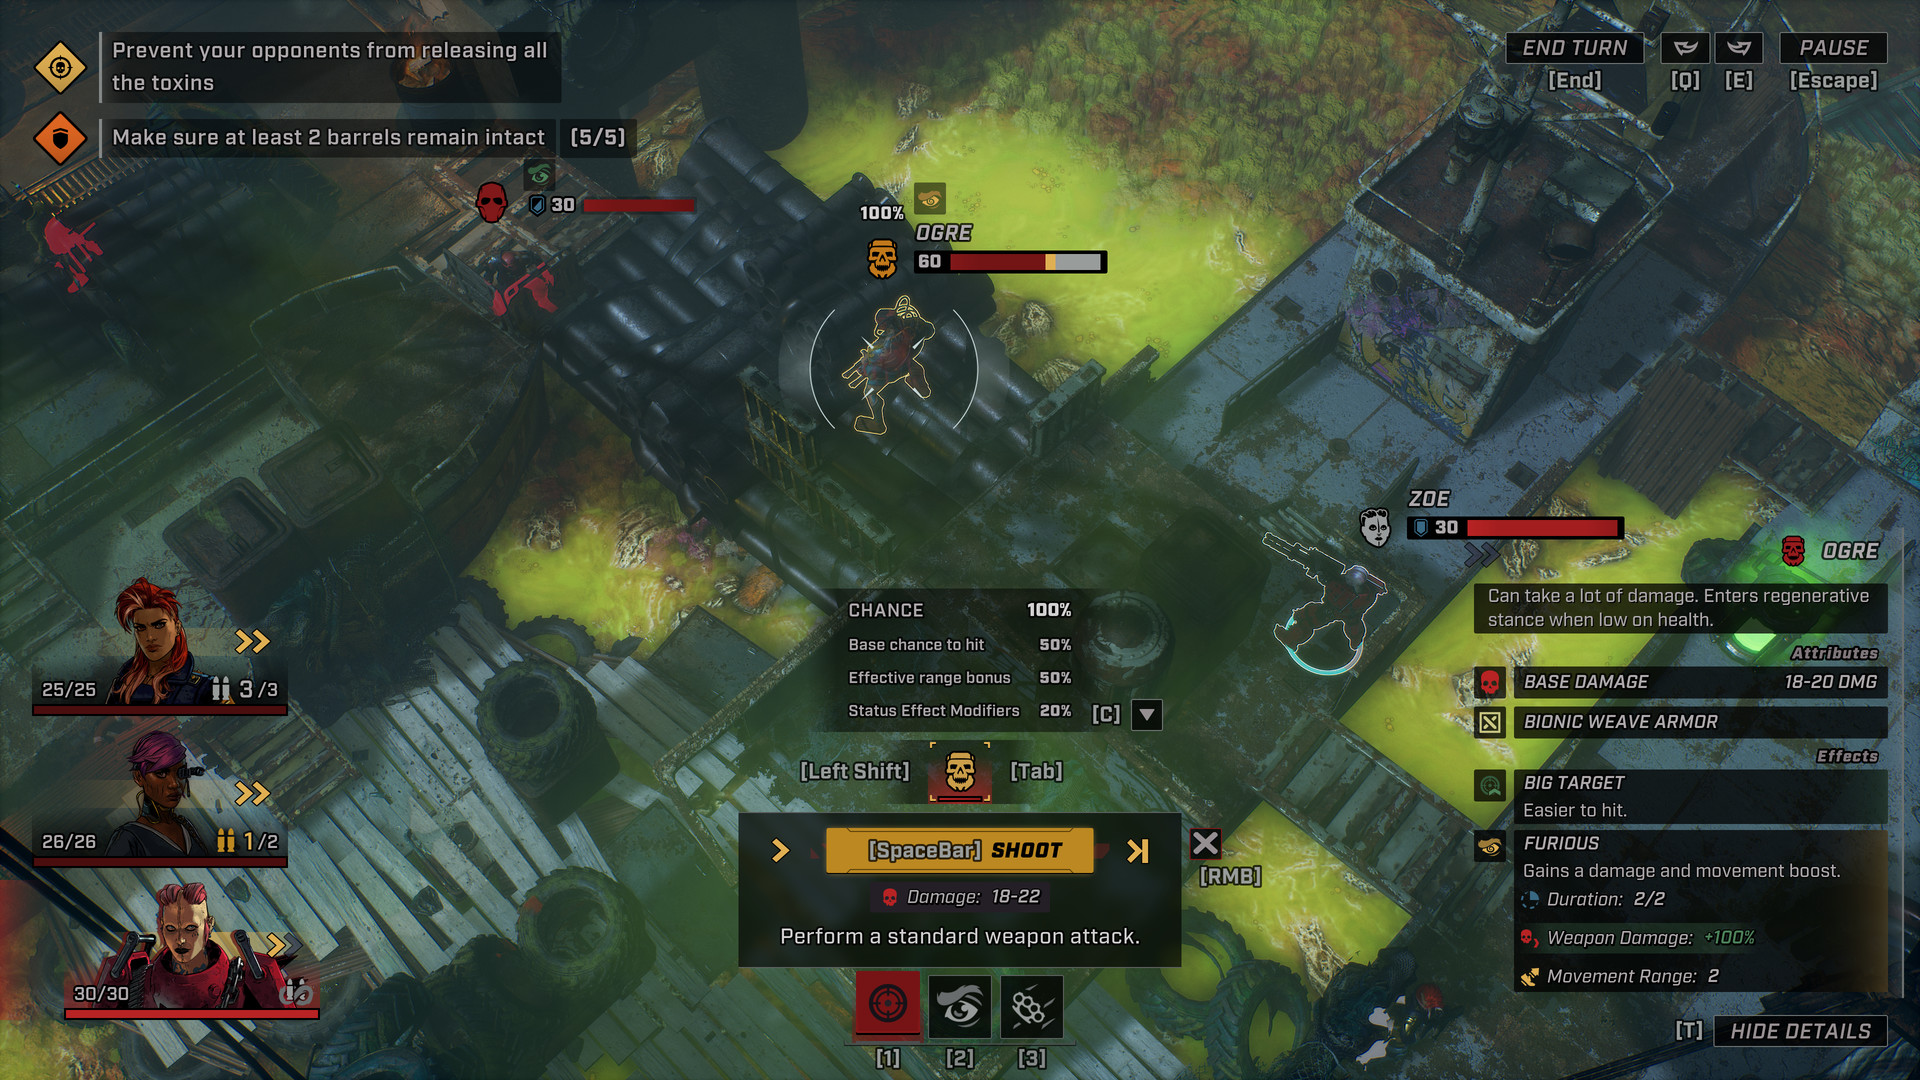 Homicidal All-Stars is a Running Man strategy game: a top-down view of a dystopian game show set, with UI showing available options for the player to steer their troops